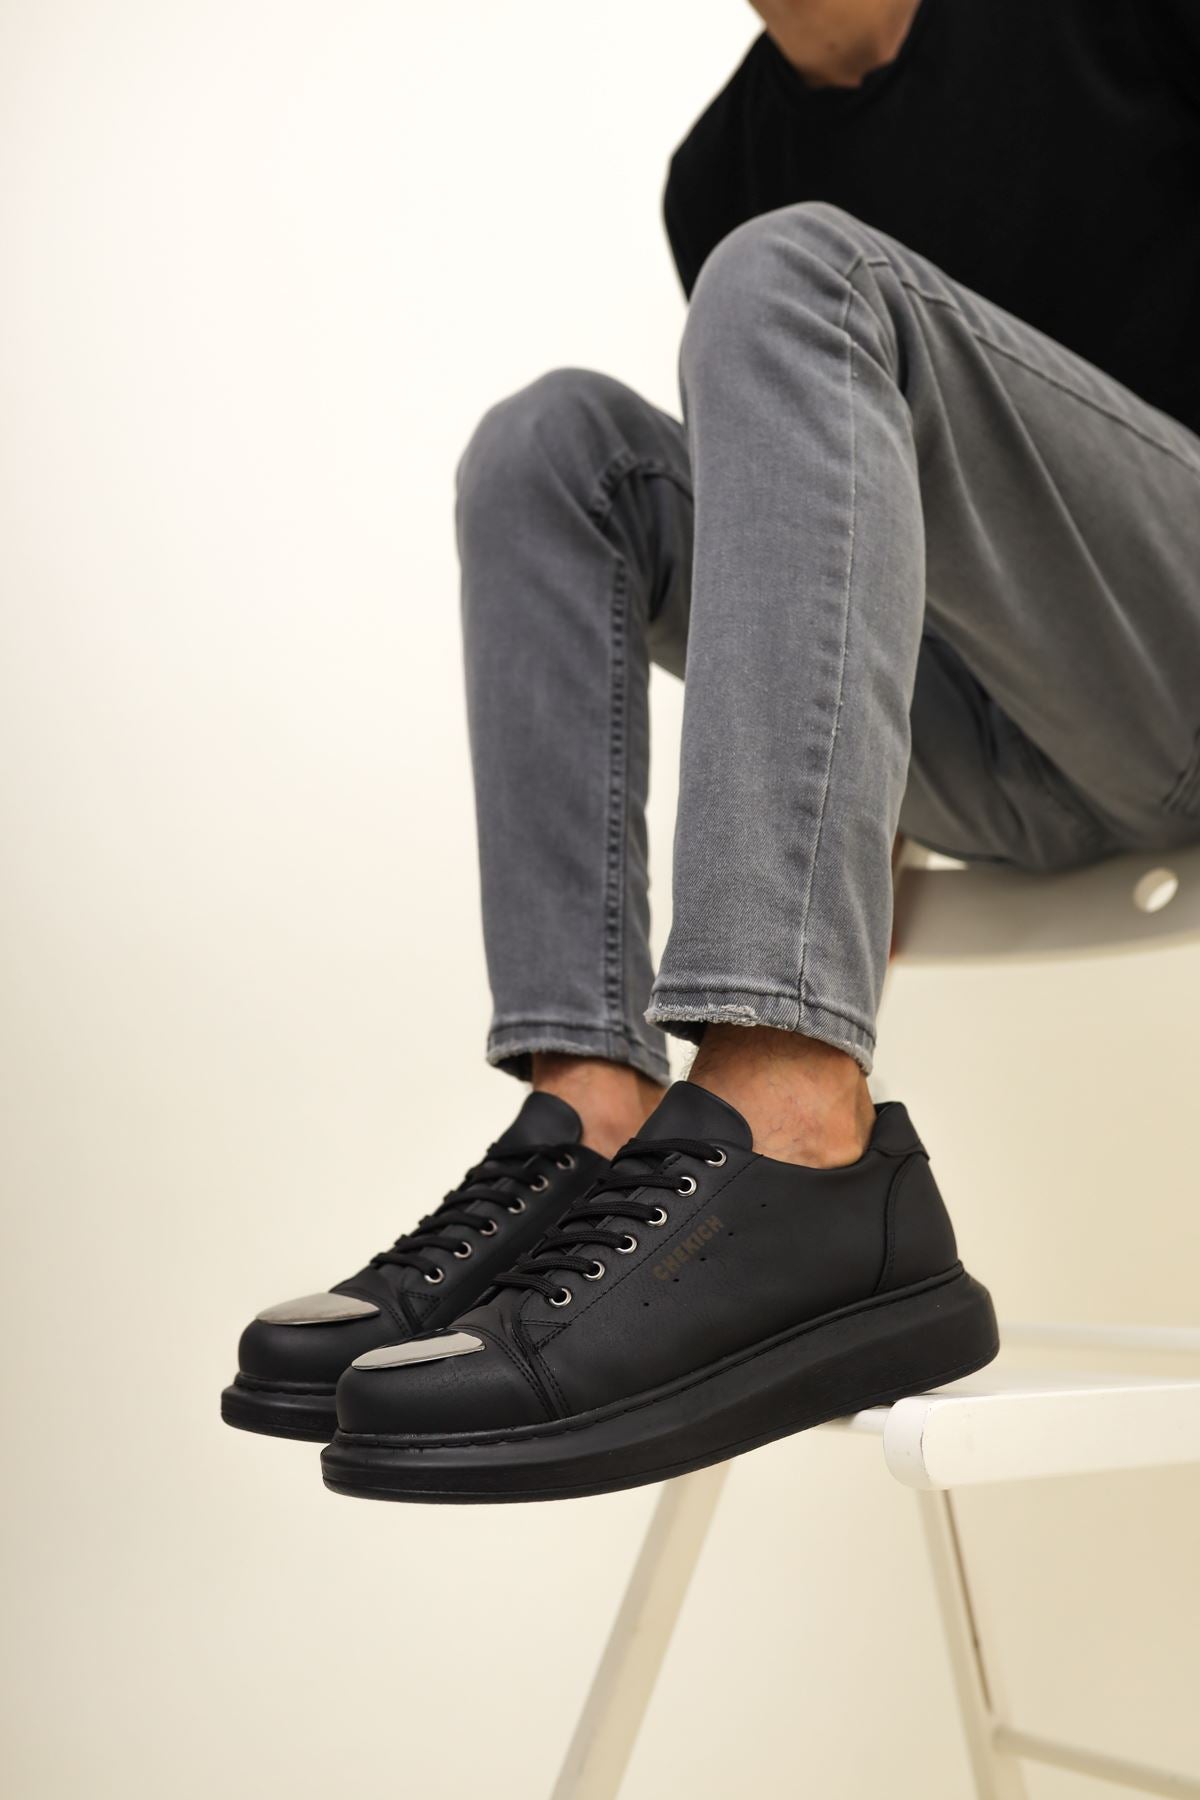 CH175 ST Men's Sneakers Shoes BLACK - STREETMODE™